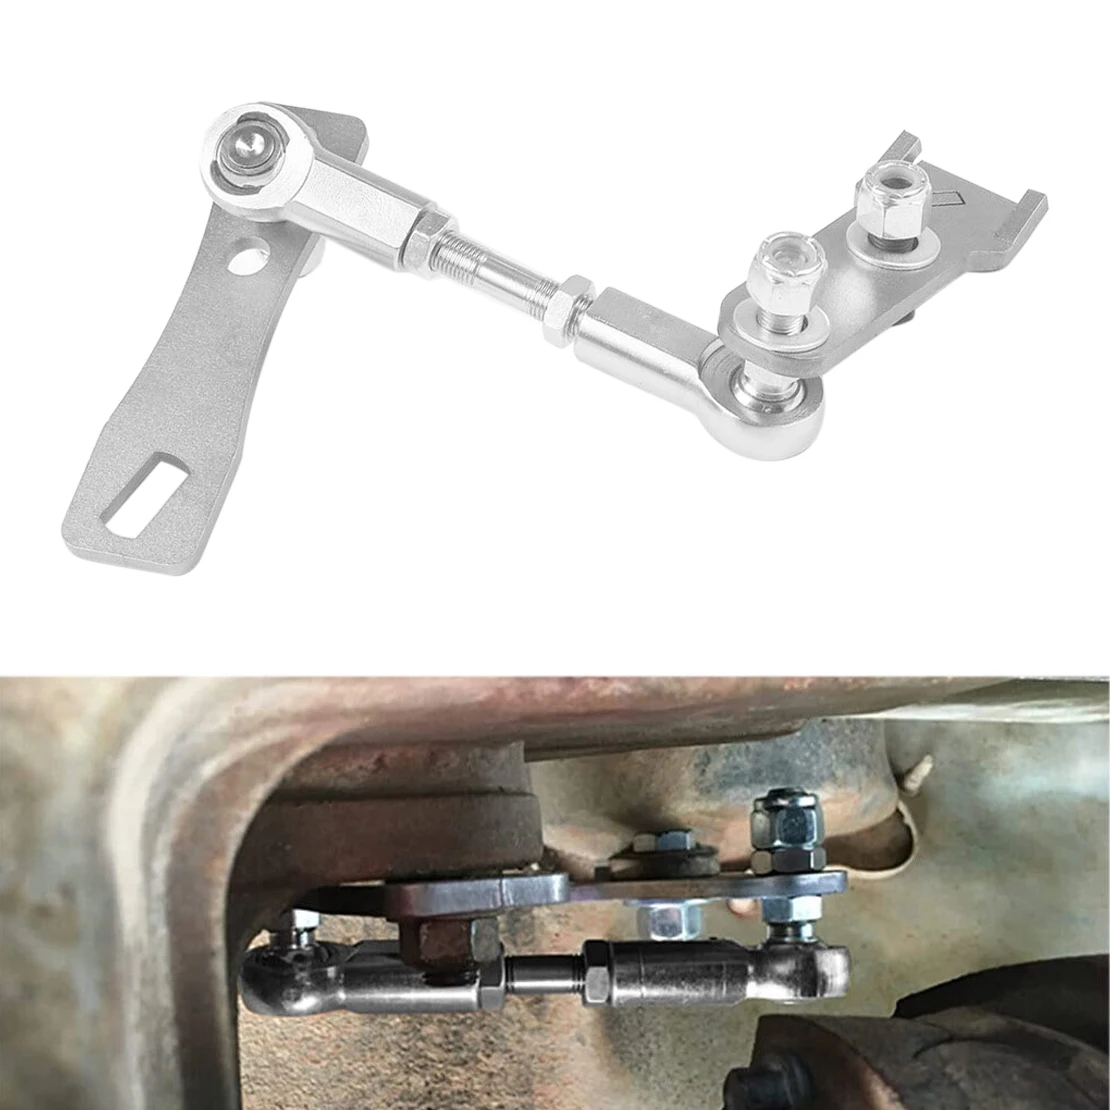 

102351 Transfer Case Linkage Kit Fit for Jeep Cherokee Comanche MJ 1986 1987 1988 1989 1990 1991 1992 1993 1994 1995-2001 Silver